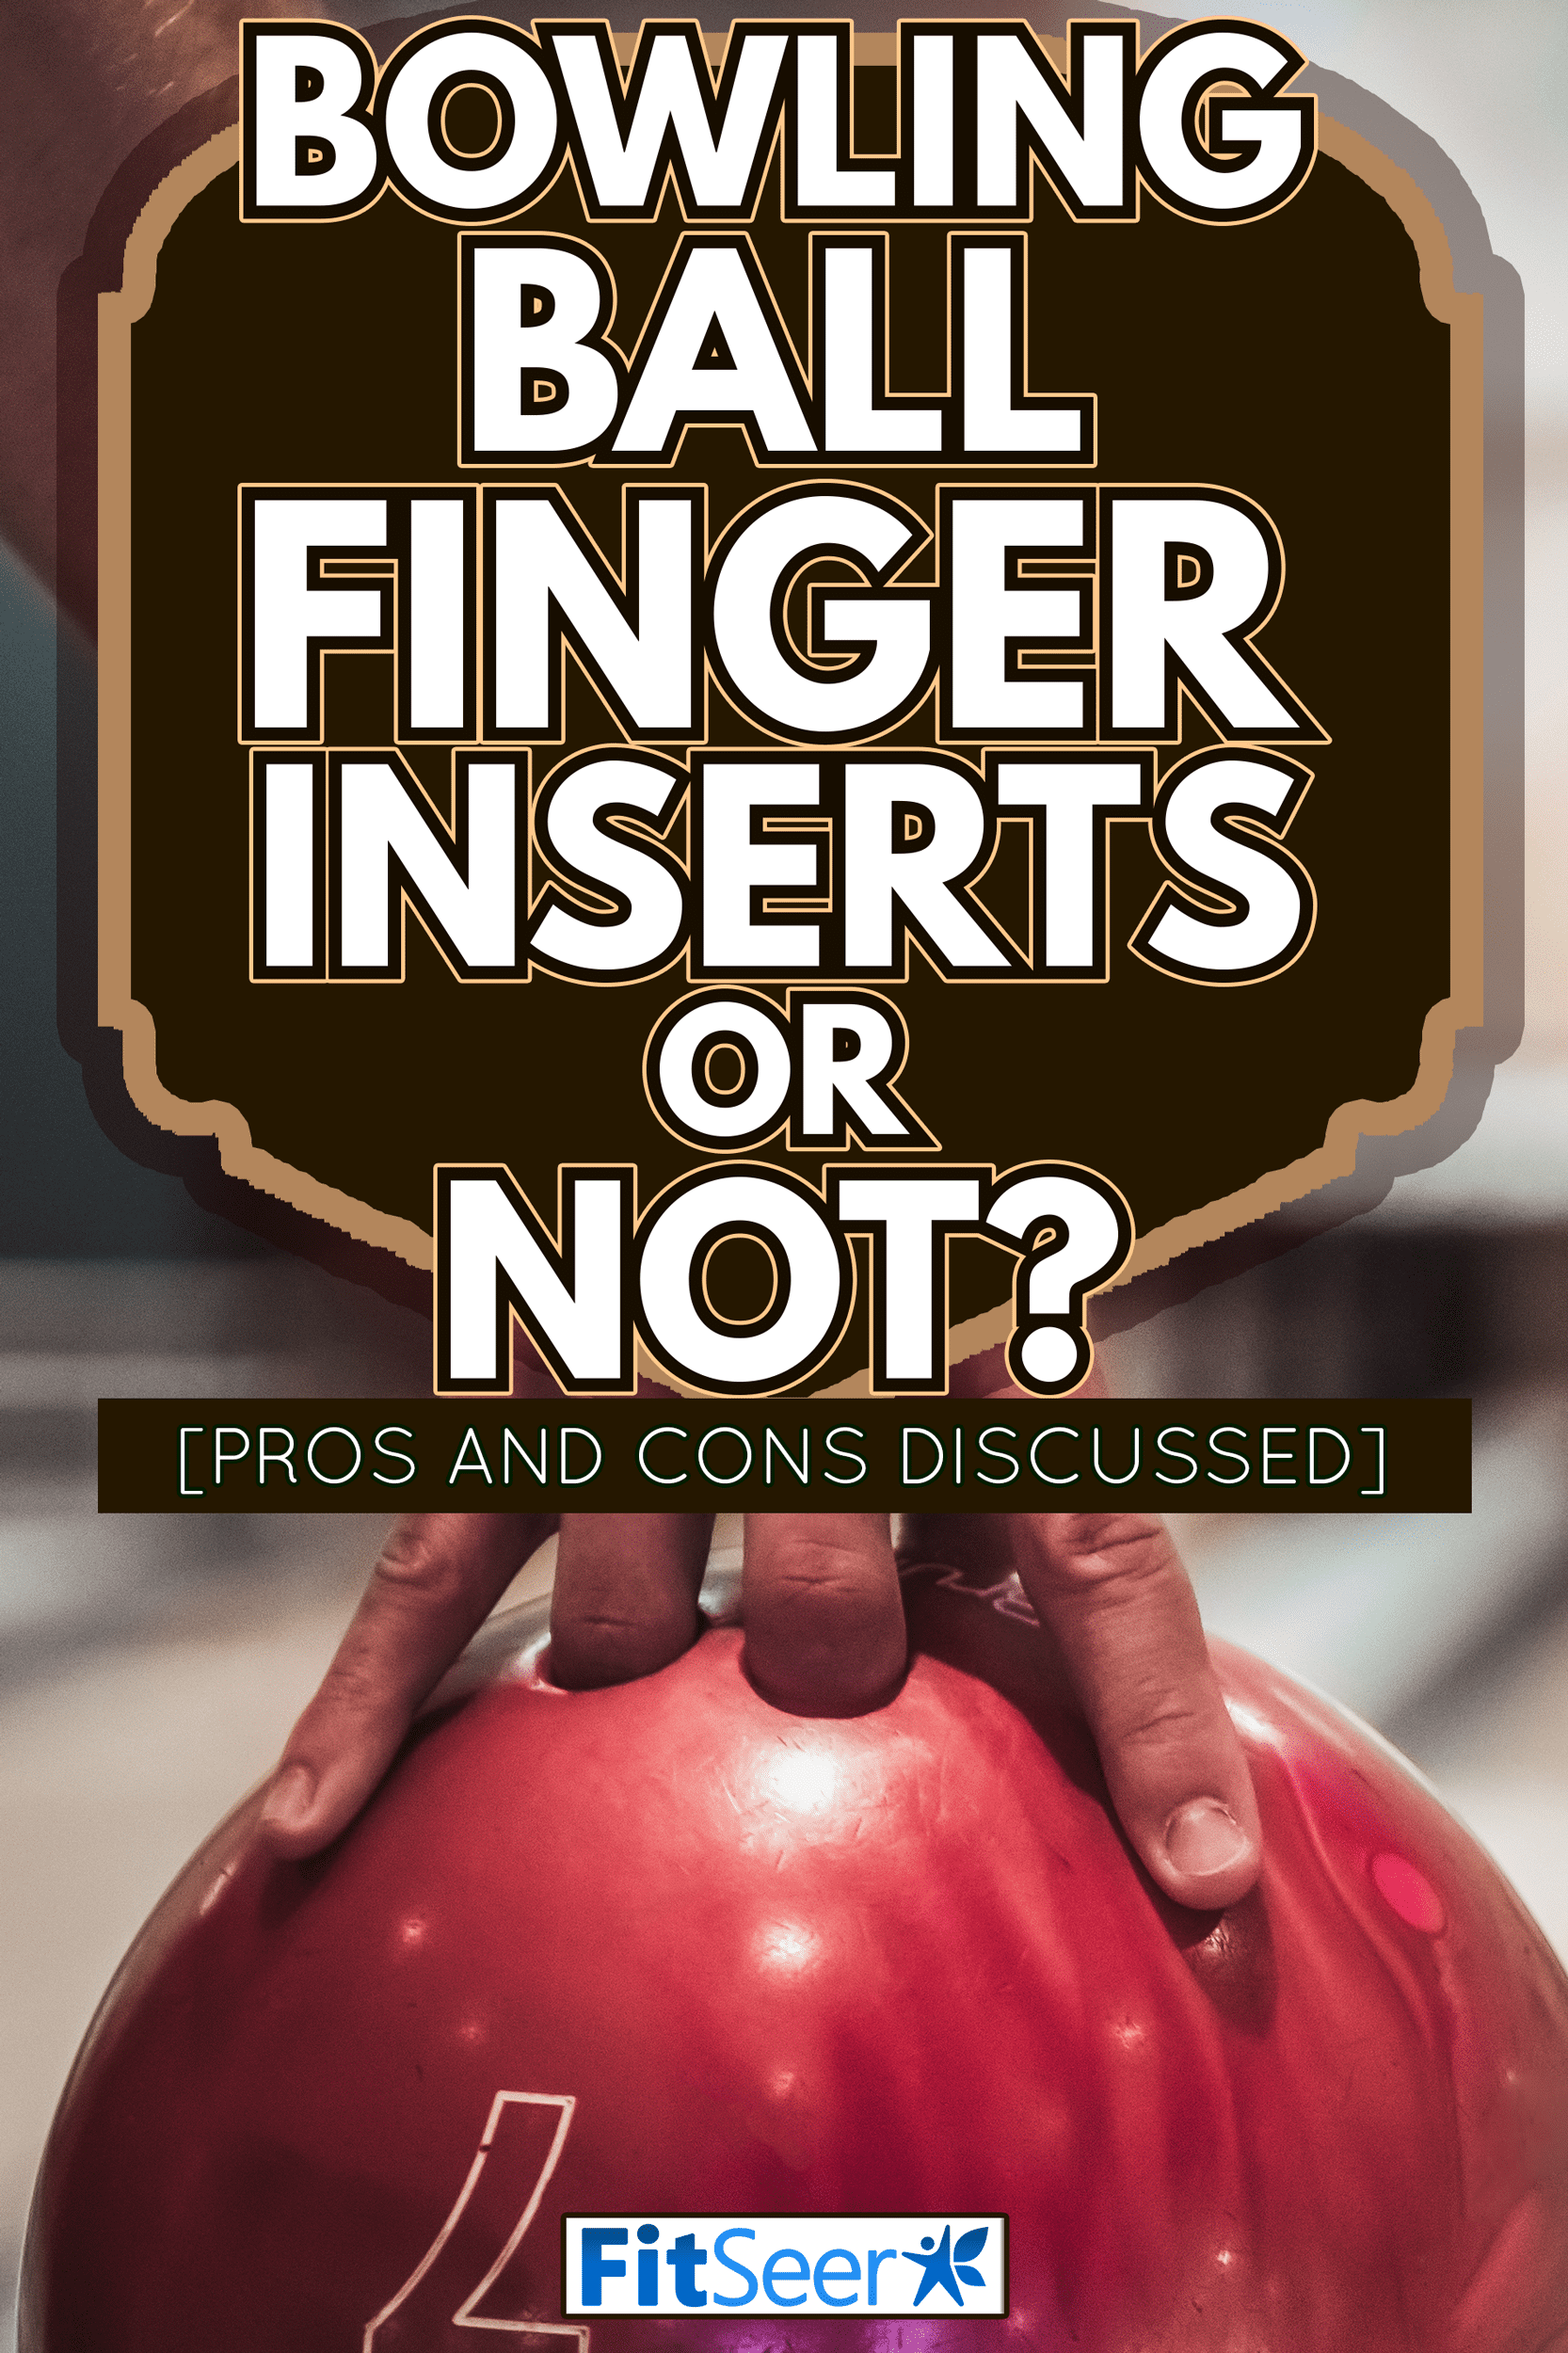 Man's hand holding a red bowling ball ready to throw it - Bowling Ball Finger Inserts Or [Pros And Cons Discussed]